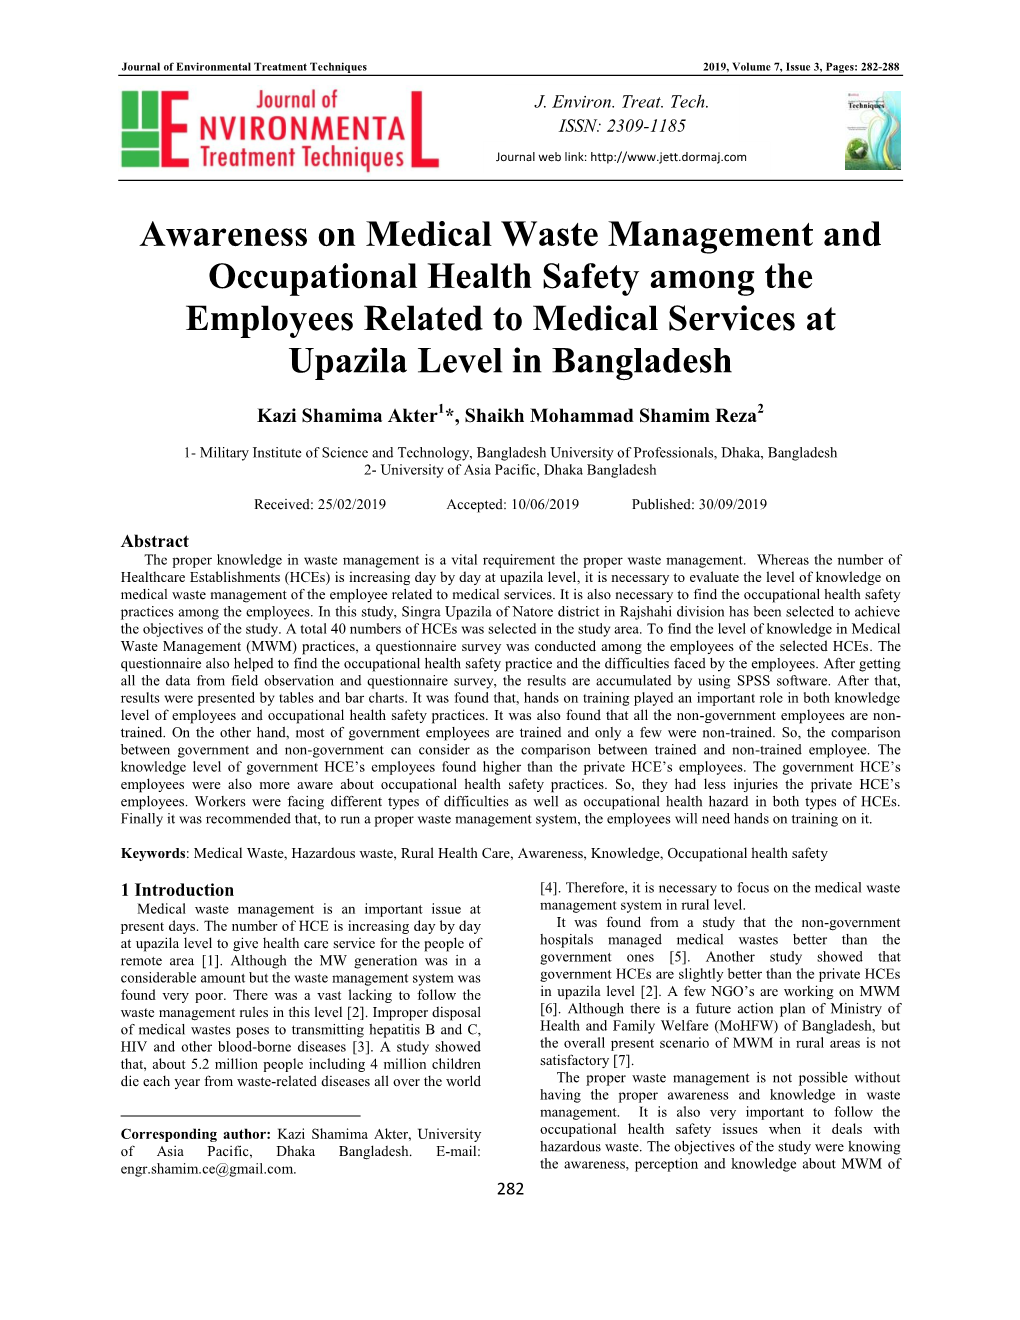 Awareness on Medical Waste Management and Occupational Health Safety Among the Employees Related to Medical Services at Upazila Level in Bangladesh